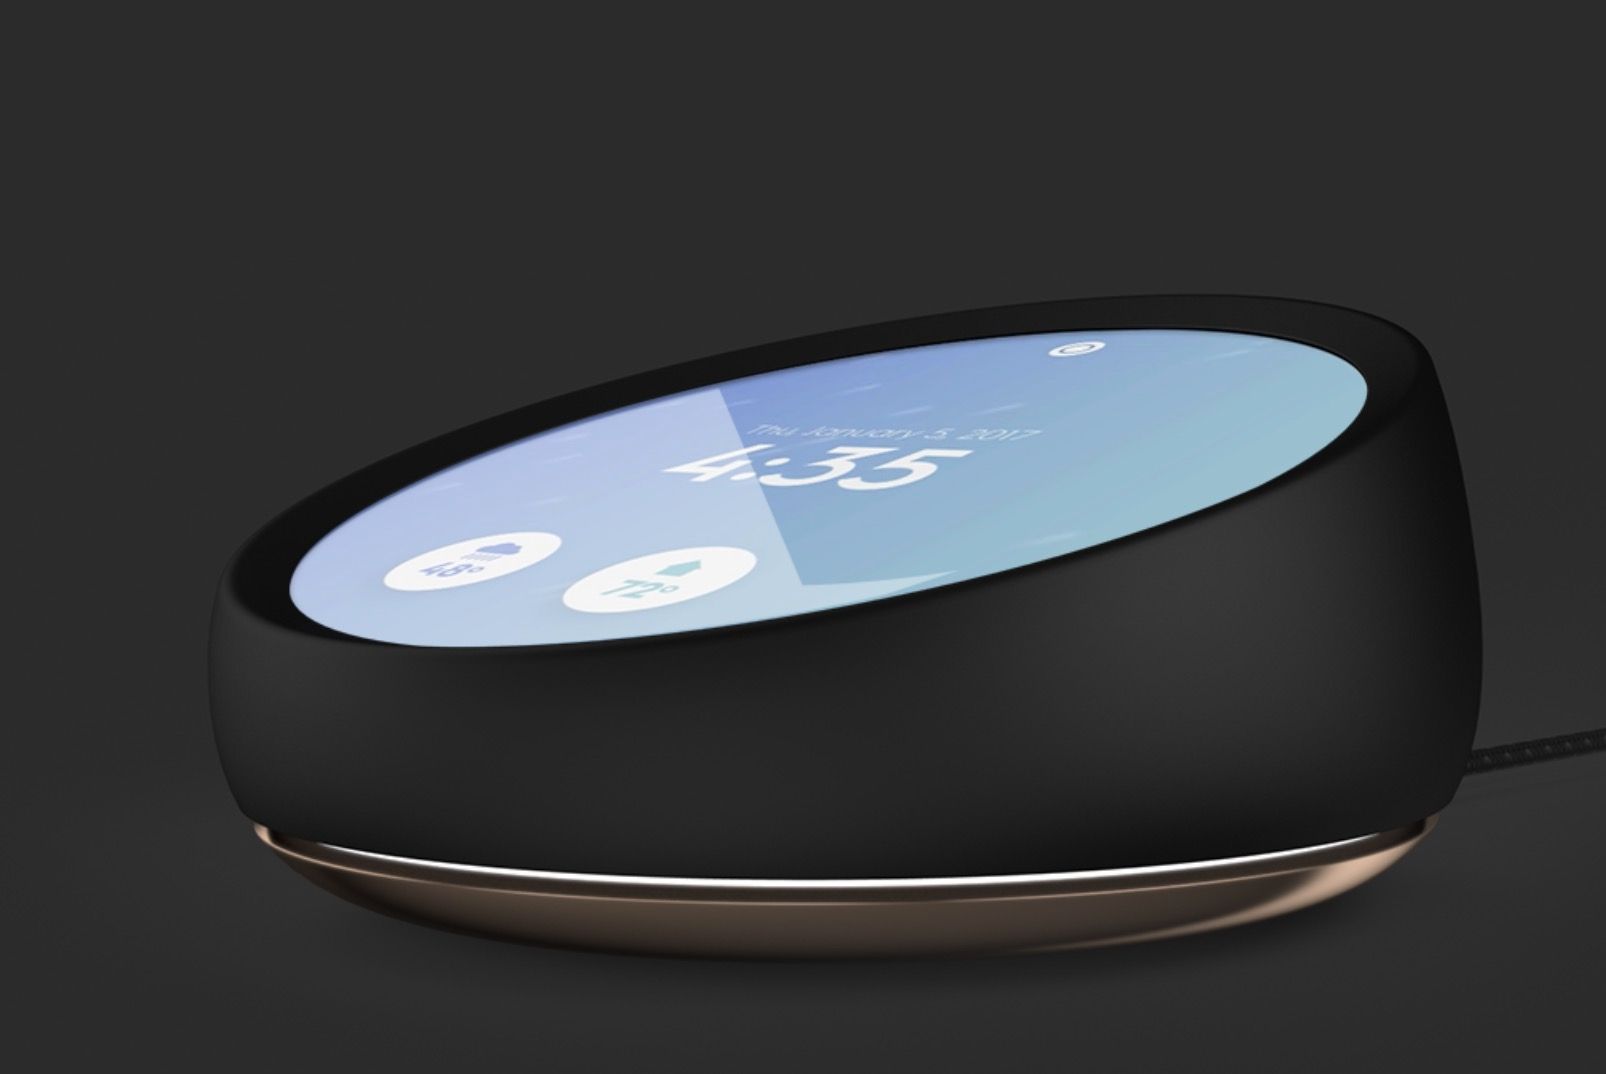 essential made an amazon echo like device called home coming soon image 1